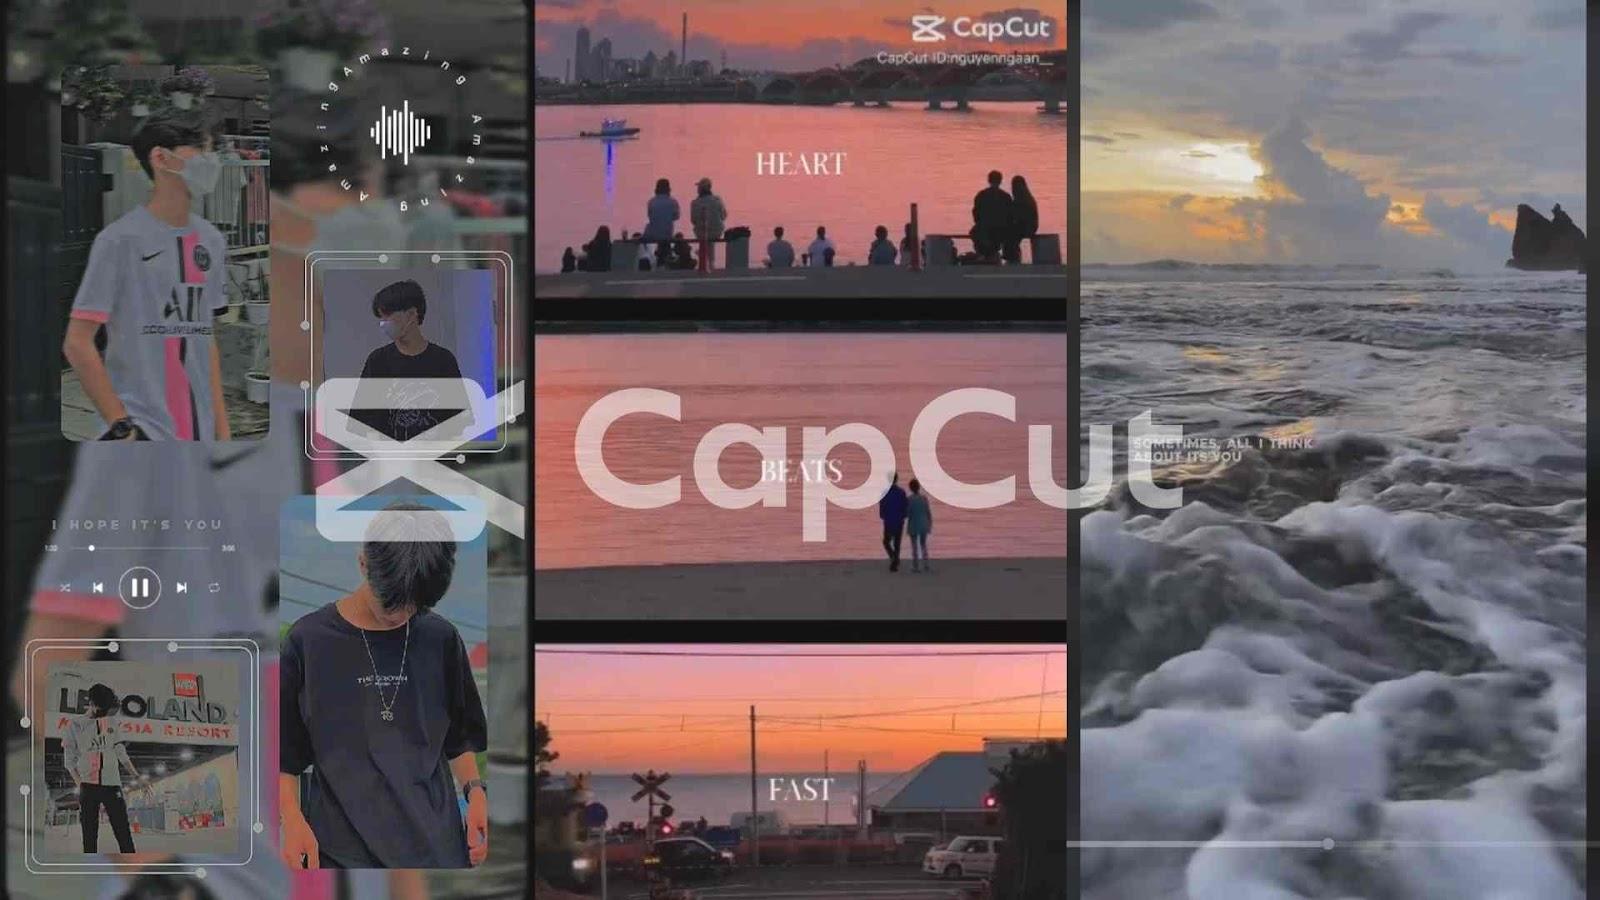 How to put a video in fast or slow motion with CapCut